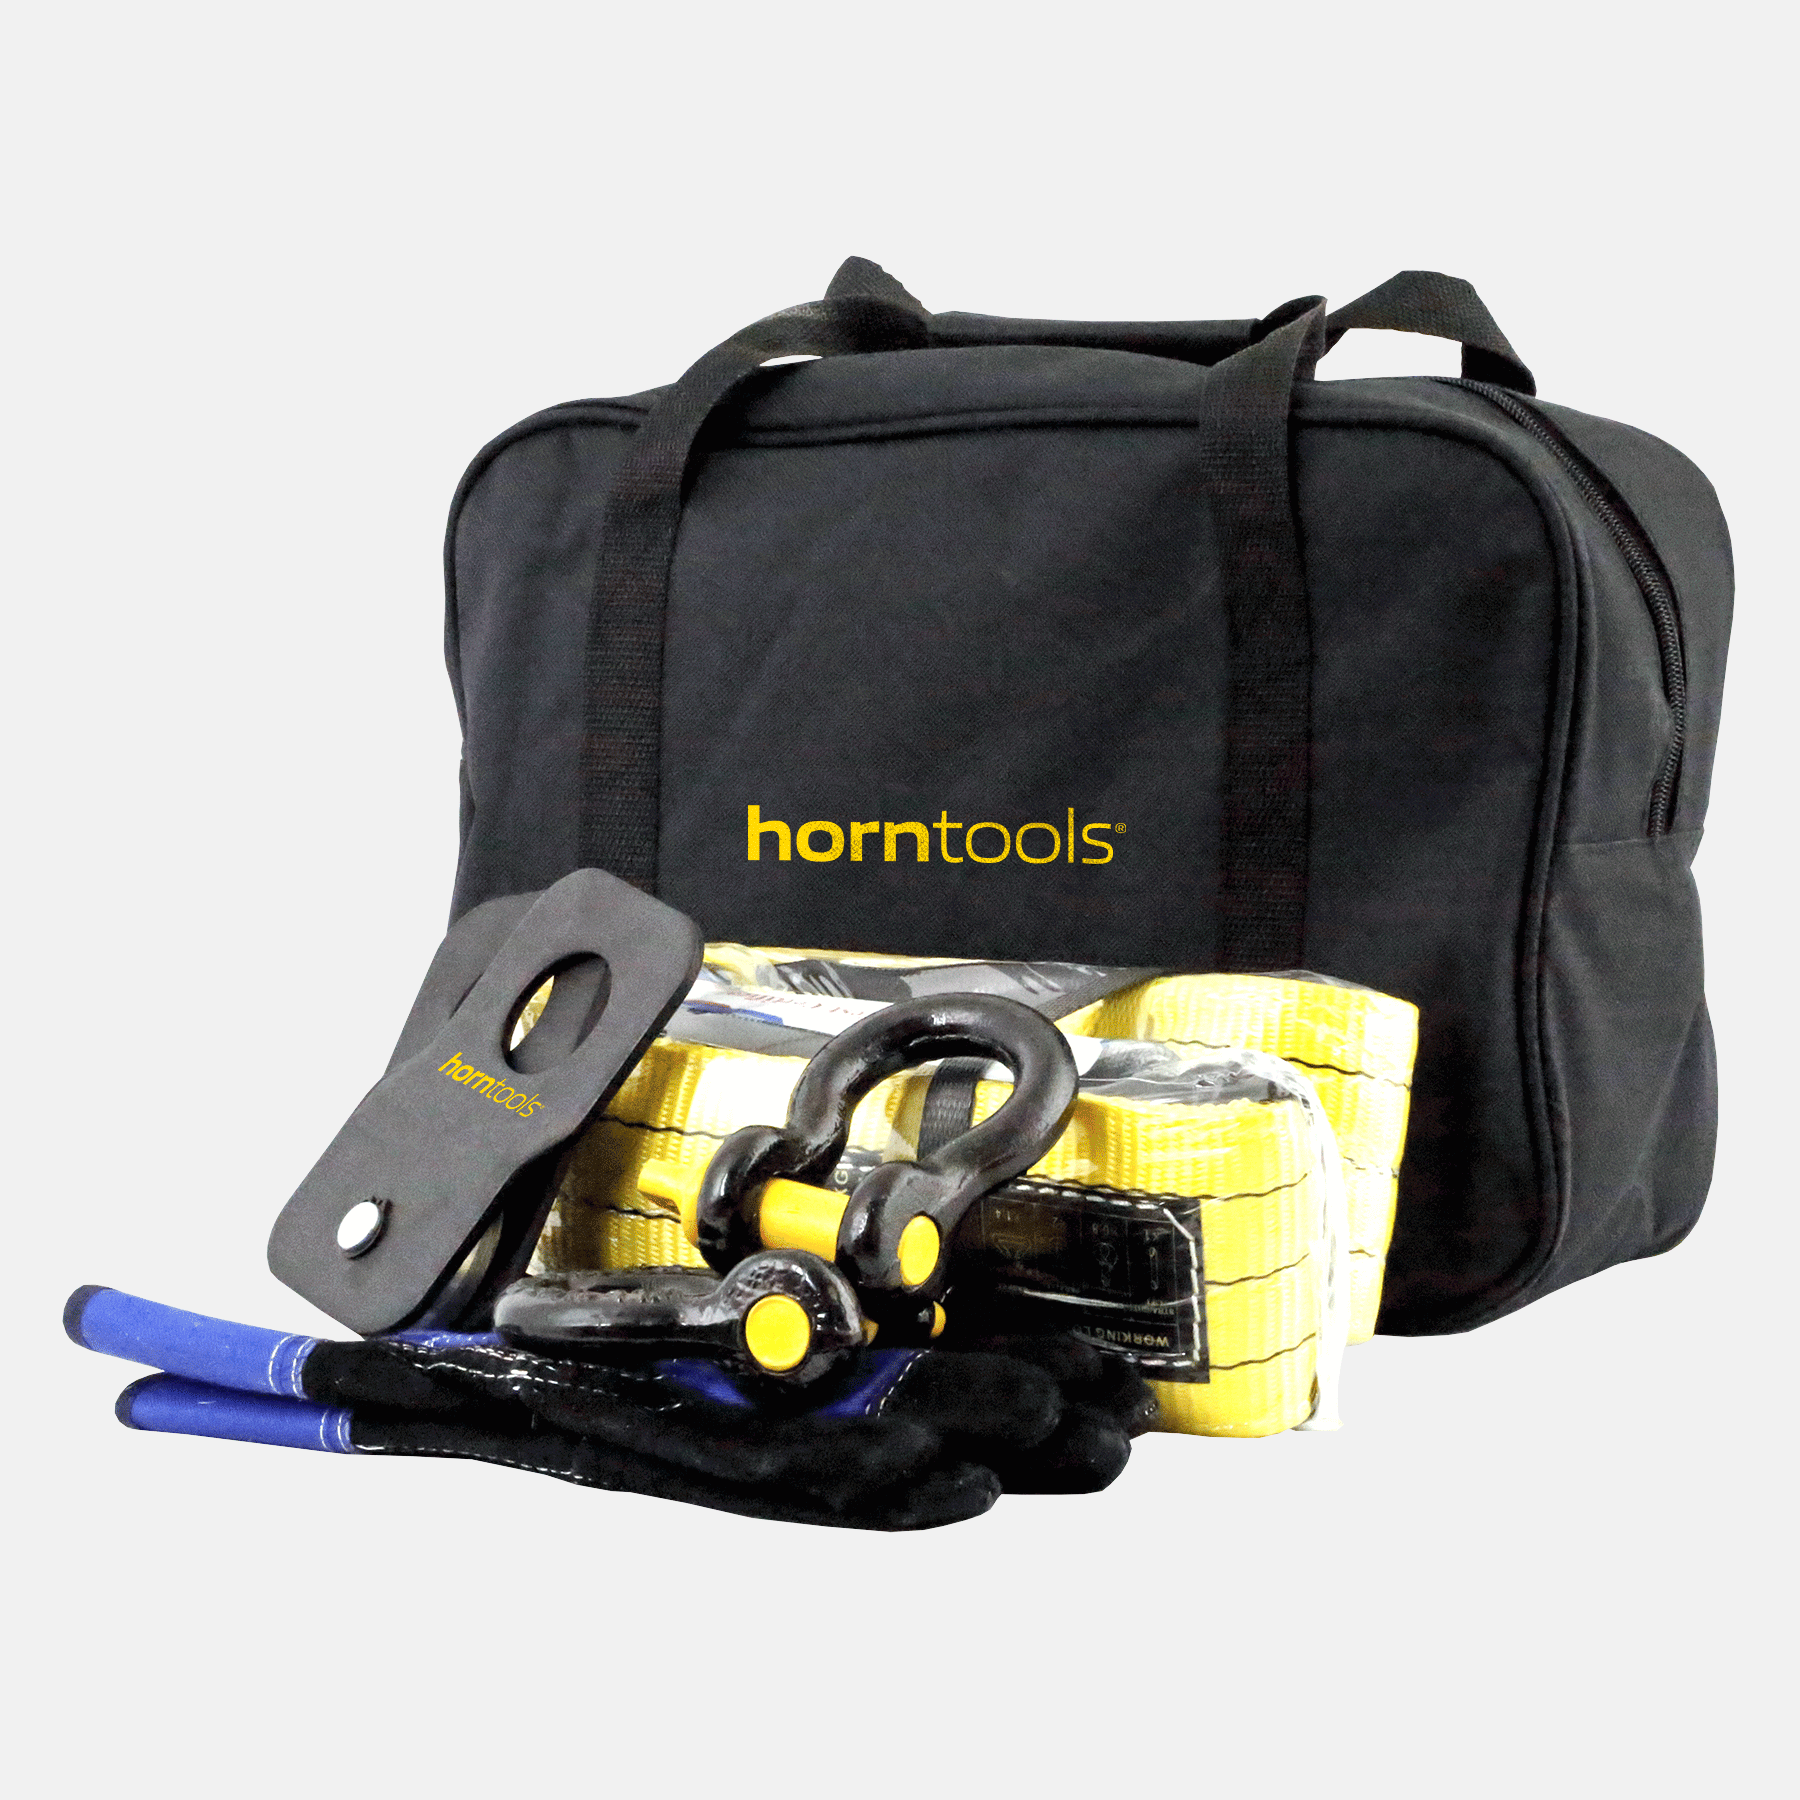 Recovery kit including accessories for a workload of up to 3.25 tons